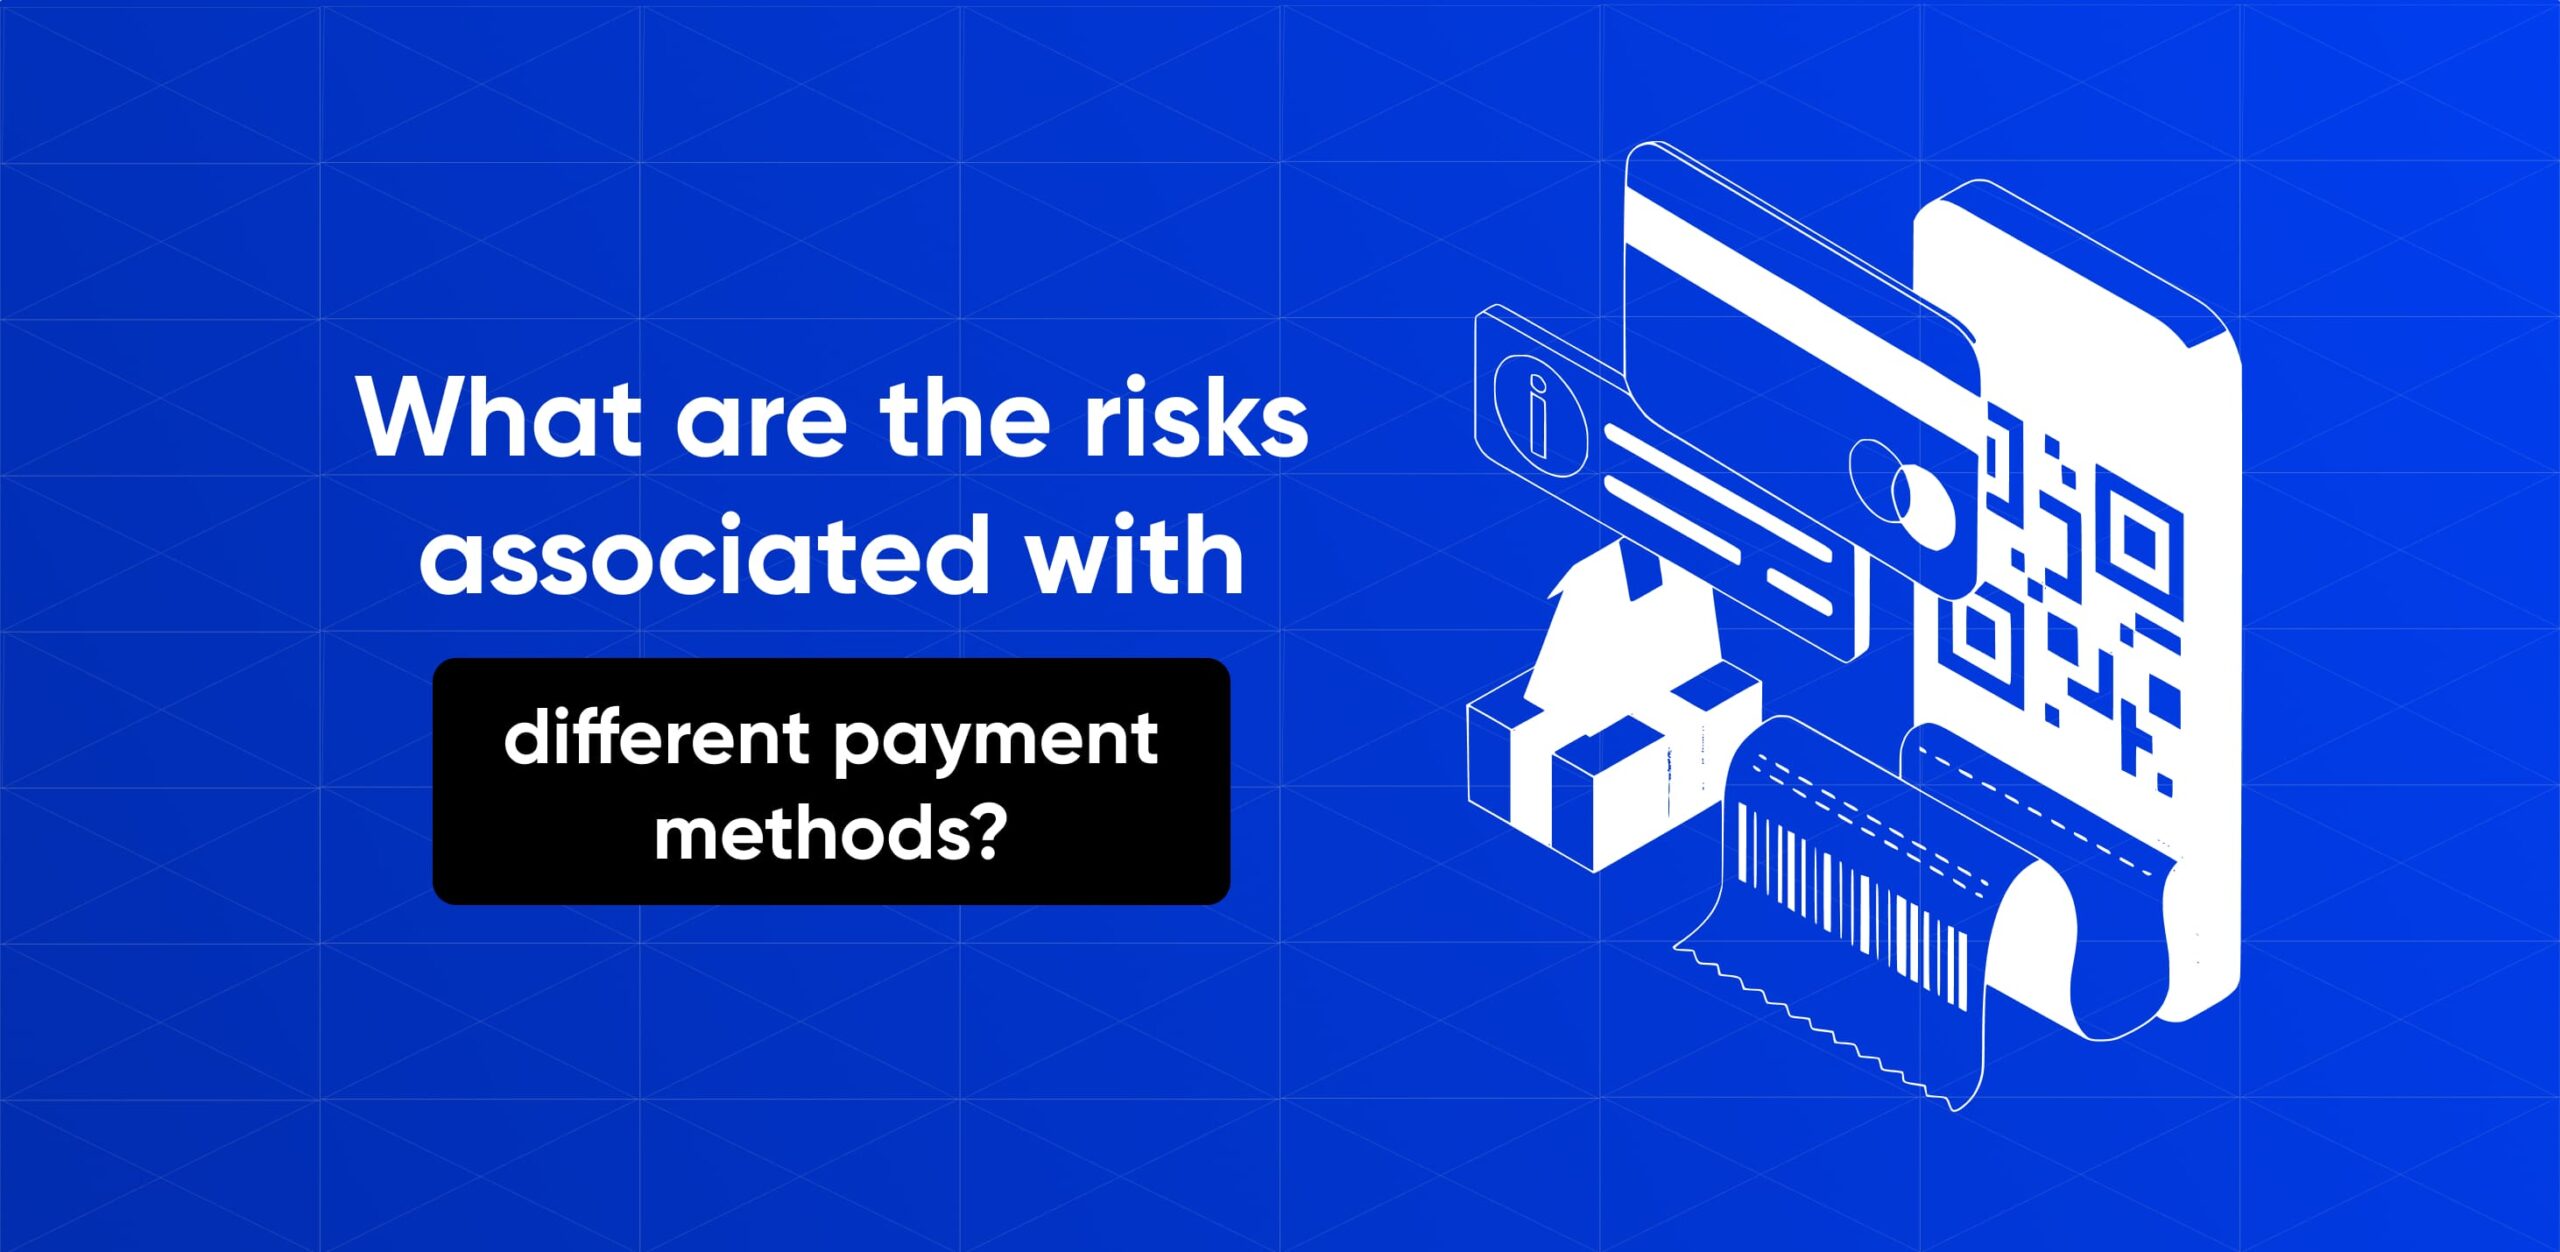 What are the risks associated with different payment methods?